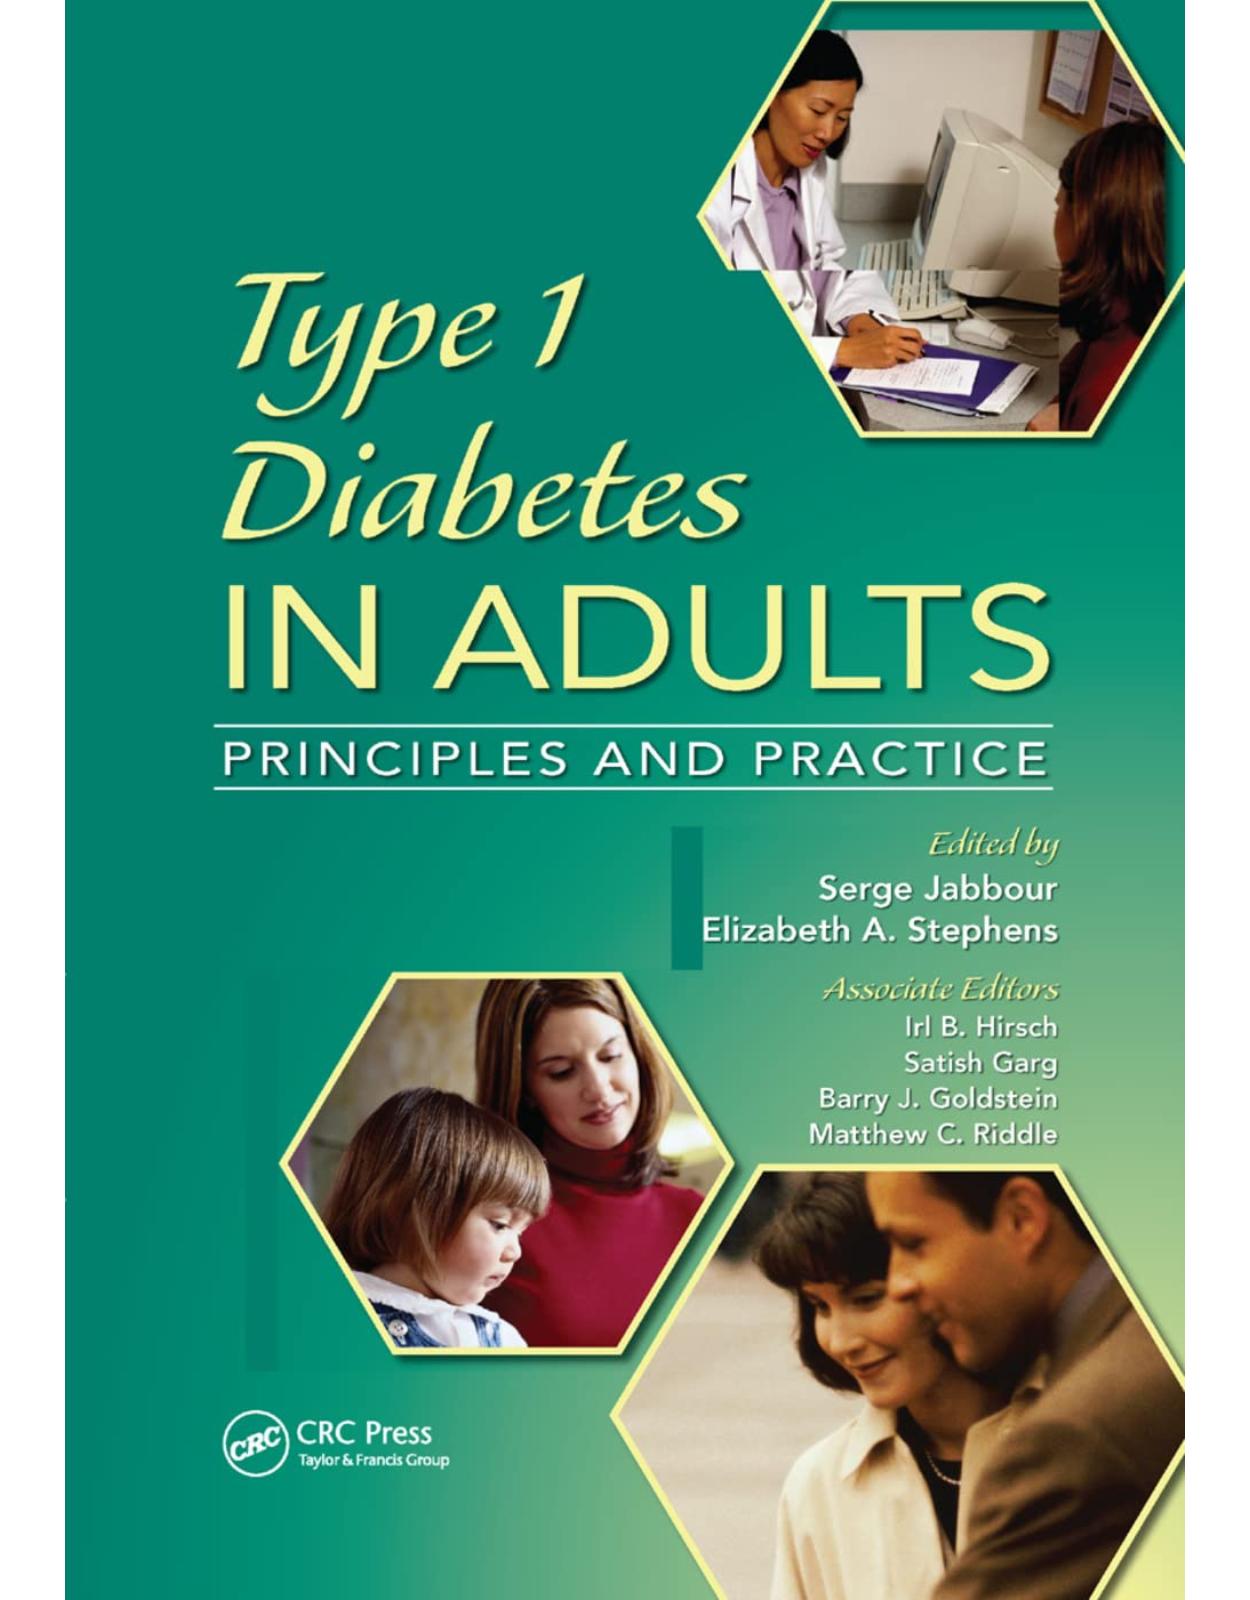 Type 1 Diabetes in Adults: Principles and Practice